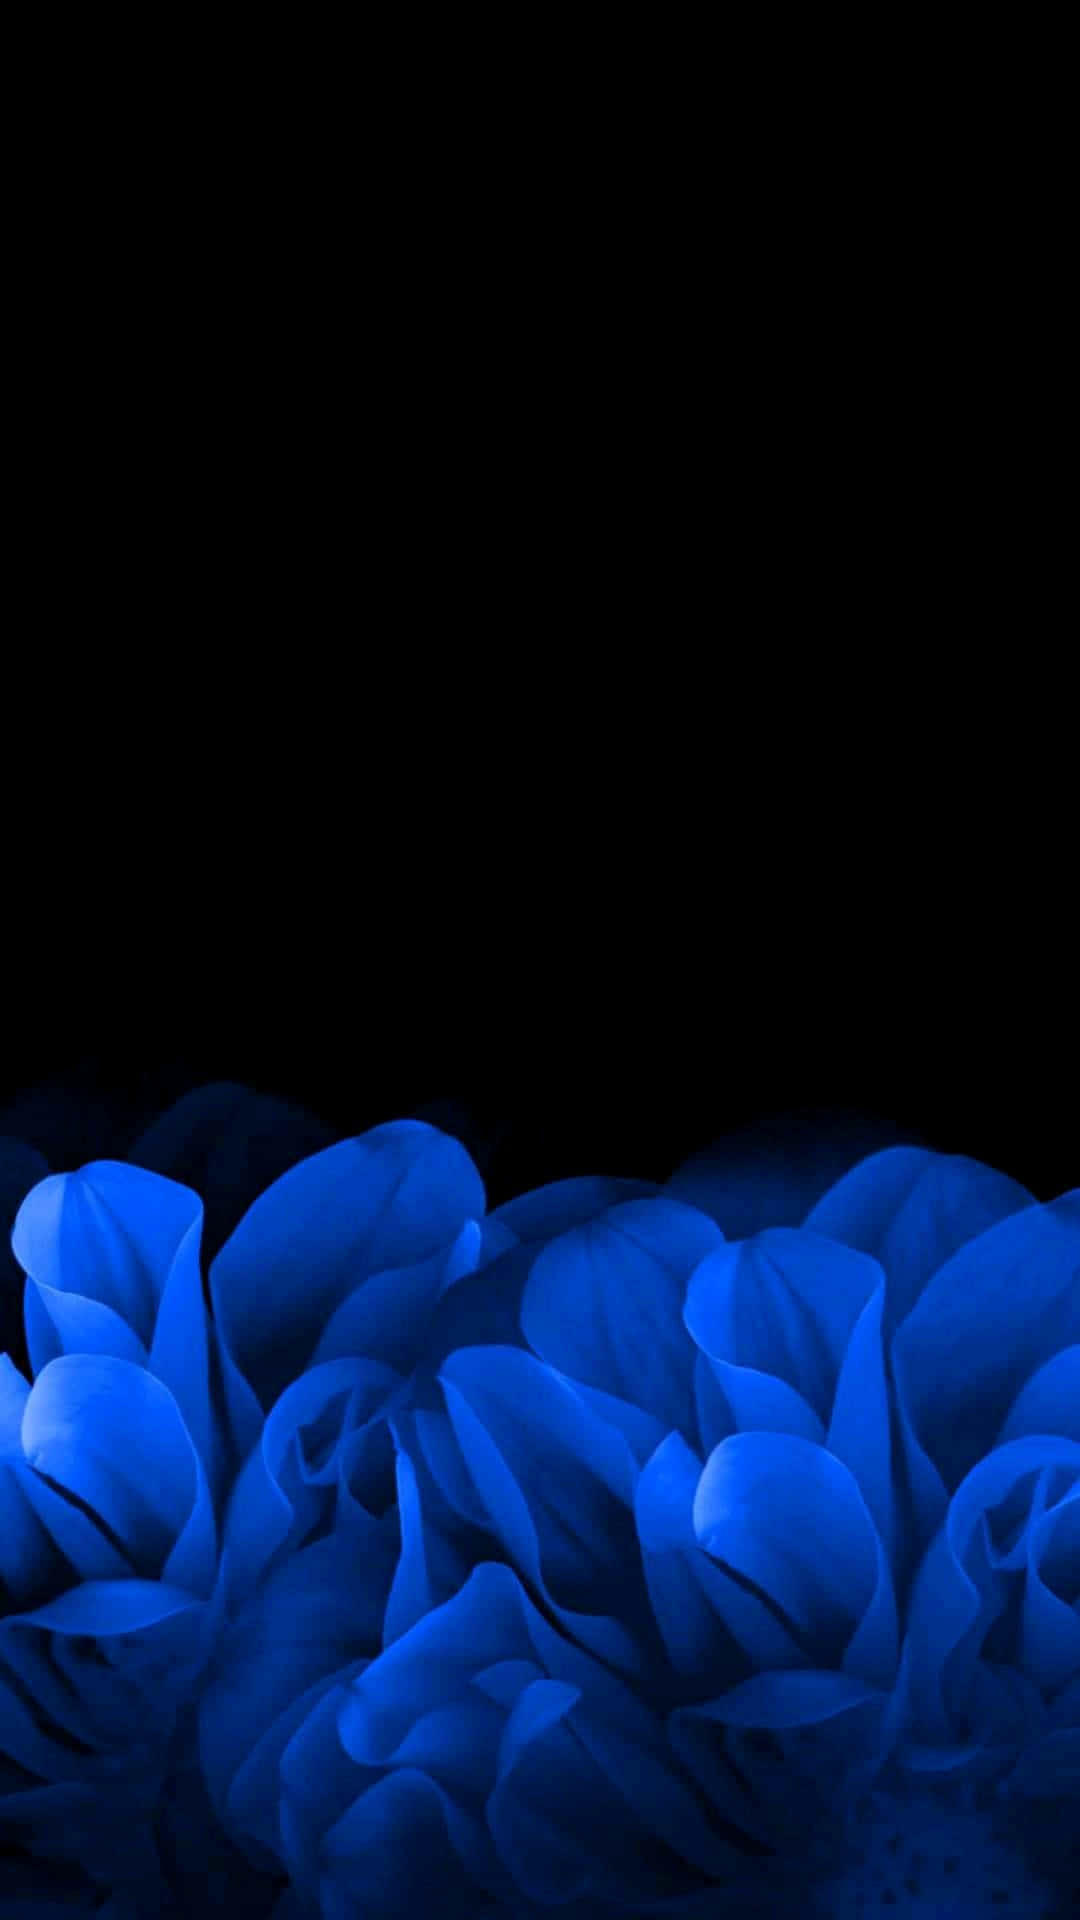 Unlock your true potential with a blue amoled display Wallpaper